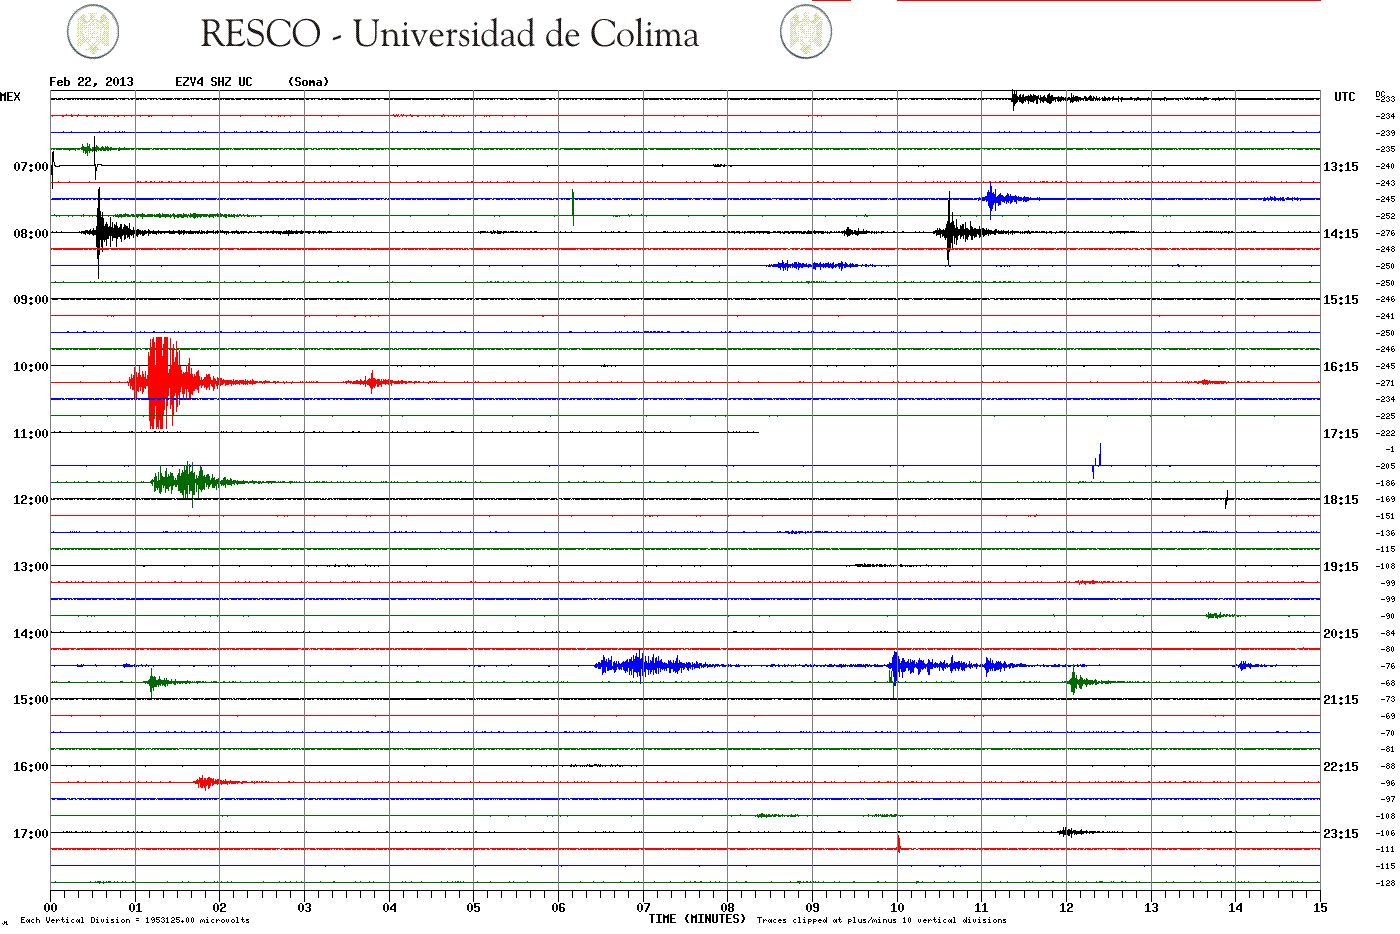 Current seismic signal from Colima (SOMA station, Univ. Colima)